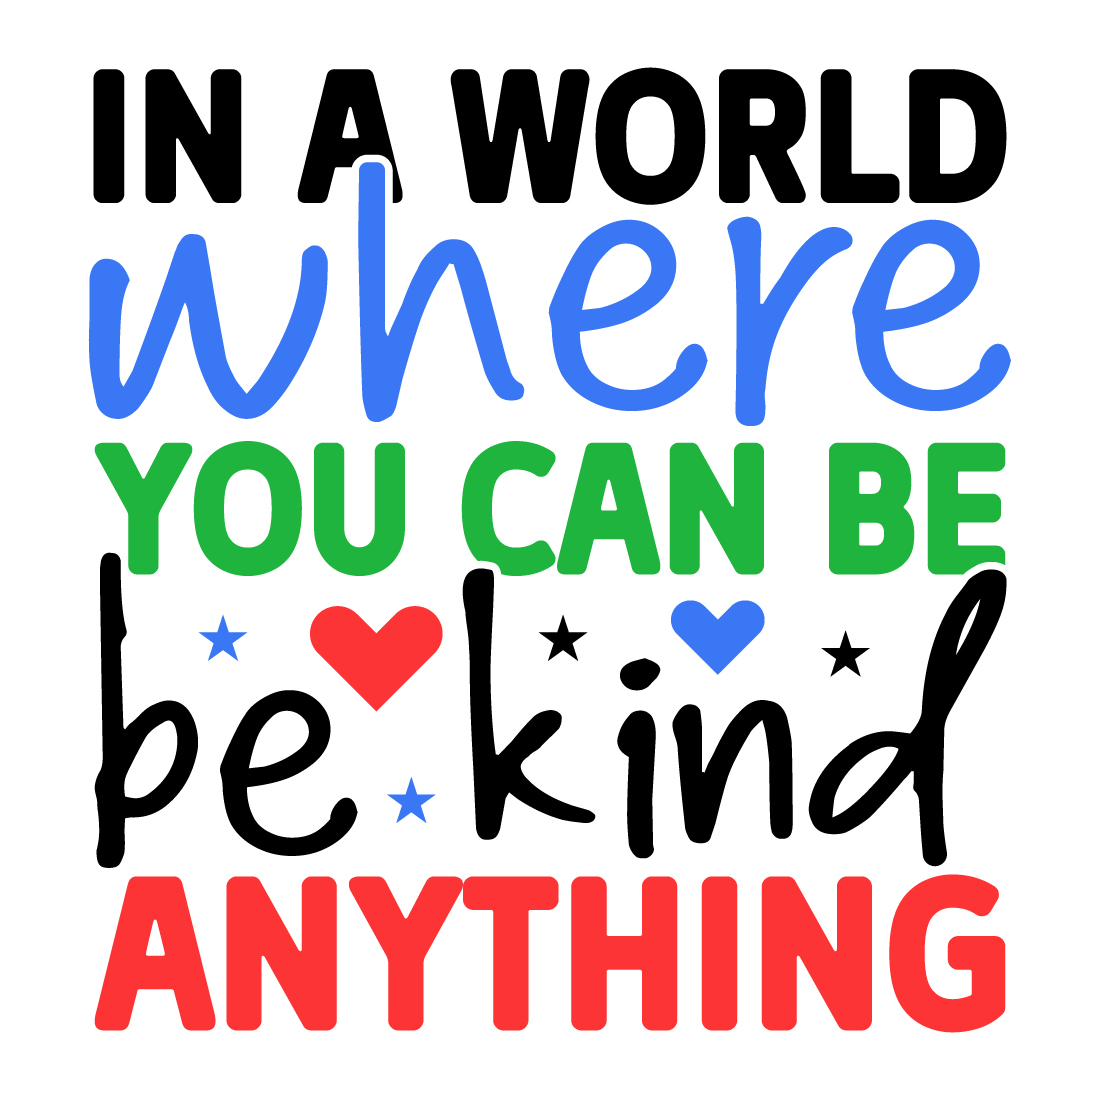 in a world where you can be anything be kind preview image.